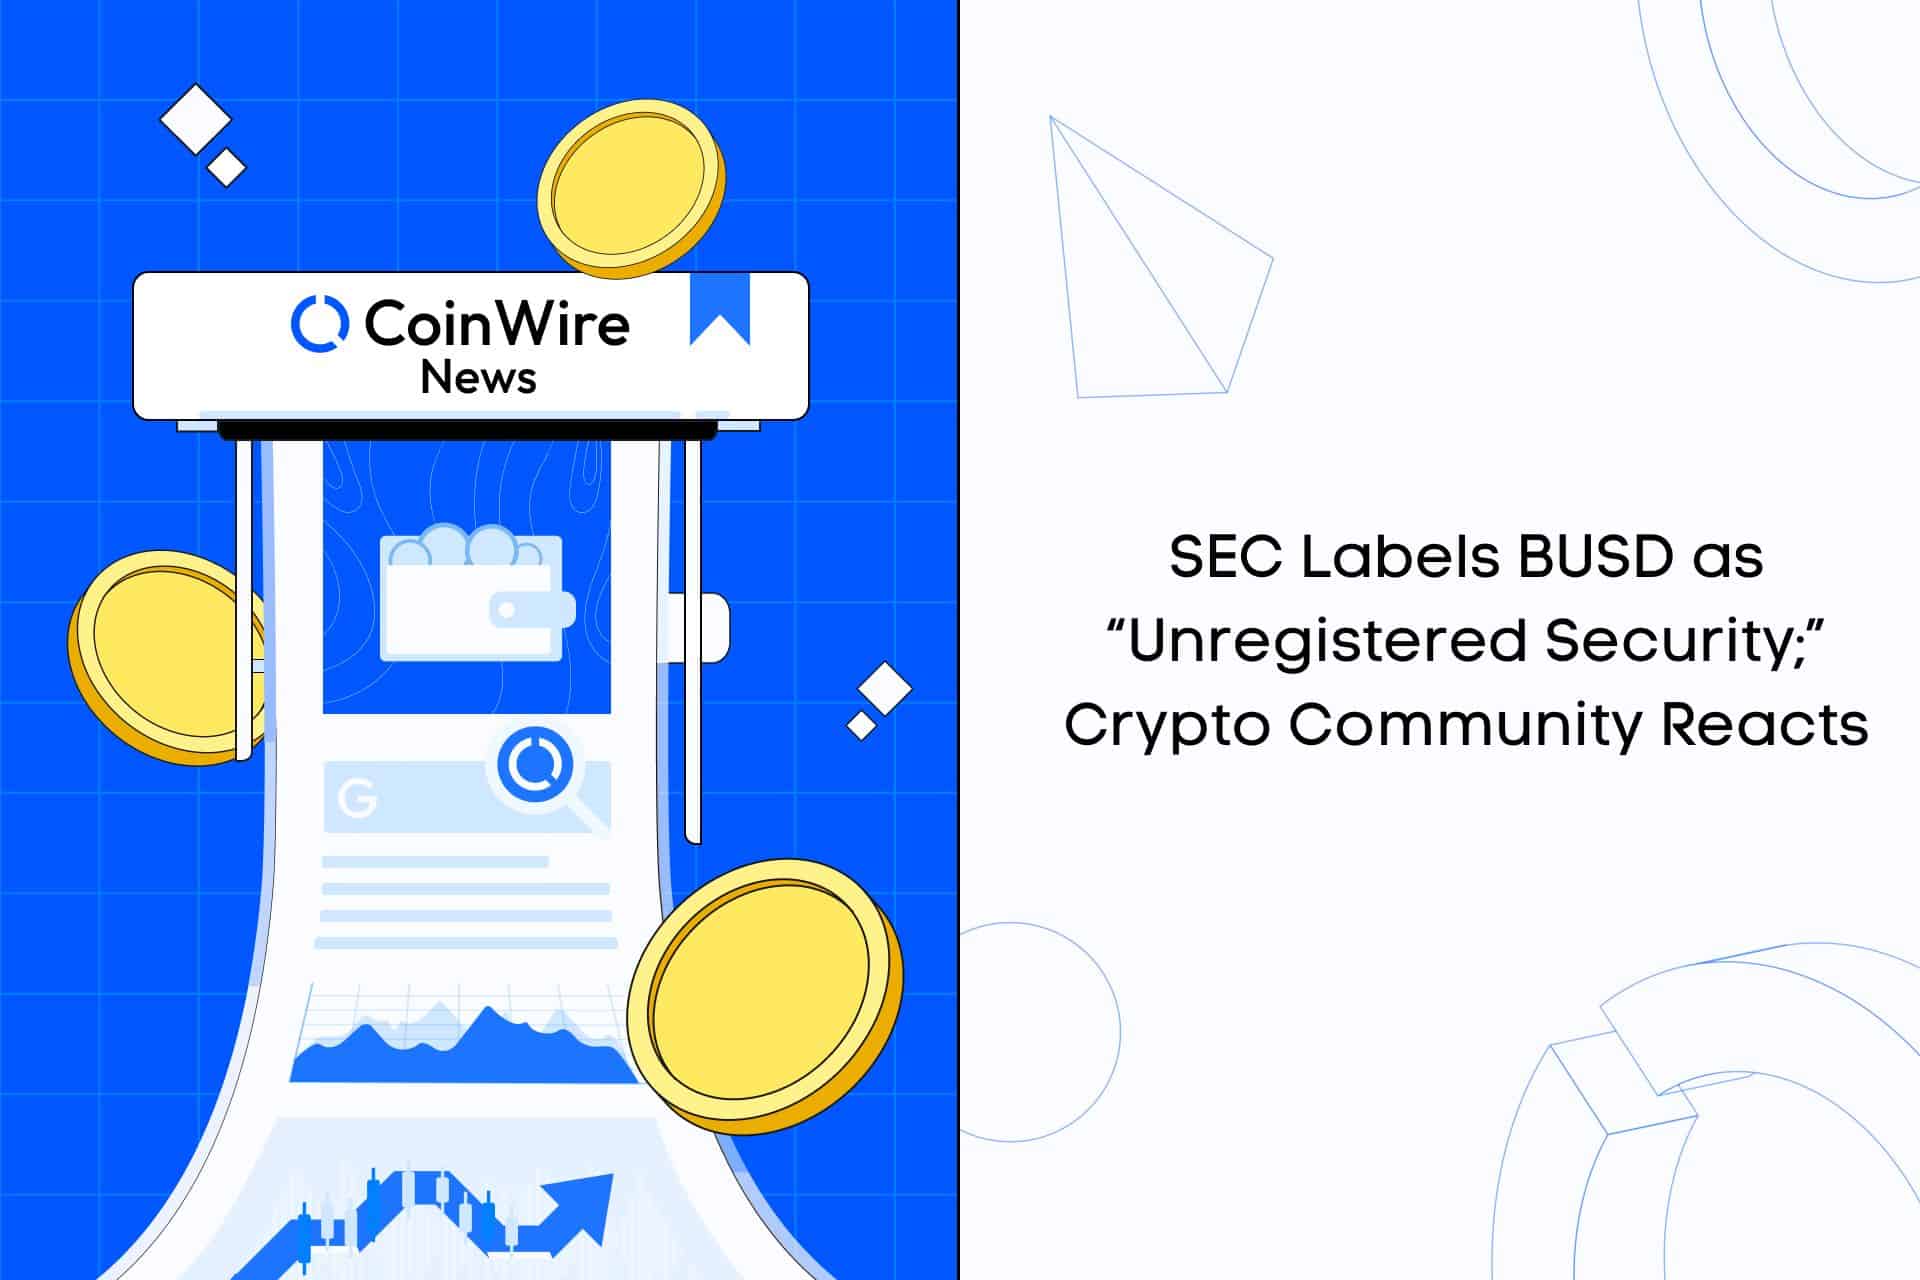 Sec Labels Busd As “Unregistered Security;” Crypto Community Reacts